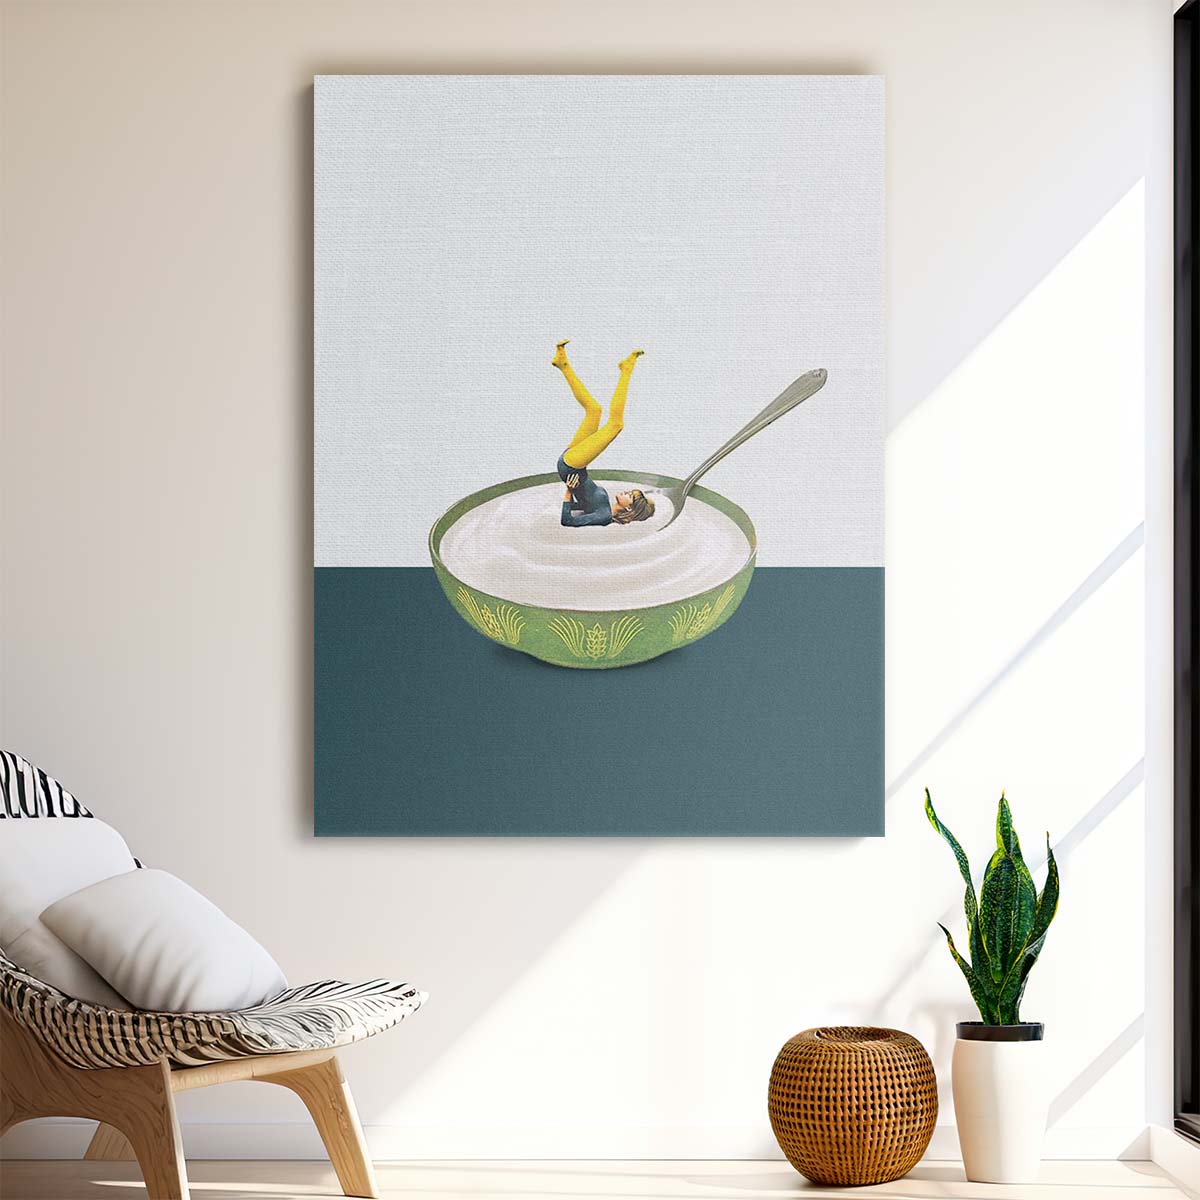 Surreal Yoga Woman Breakfast Illustration by Maarten Leon by Luxuriance Designs, made in USA